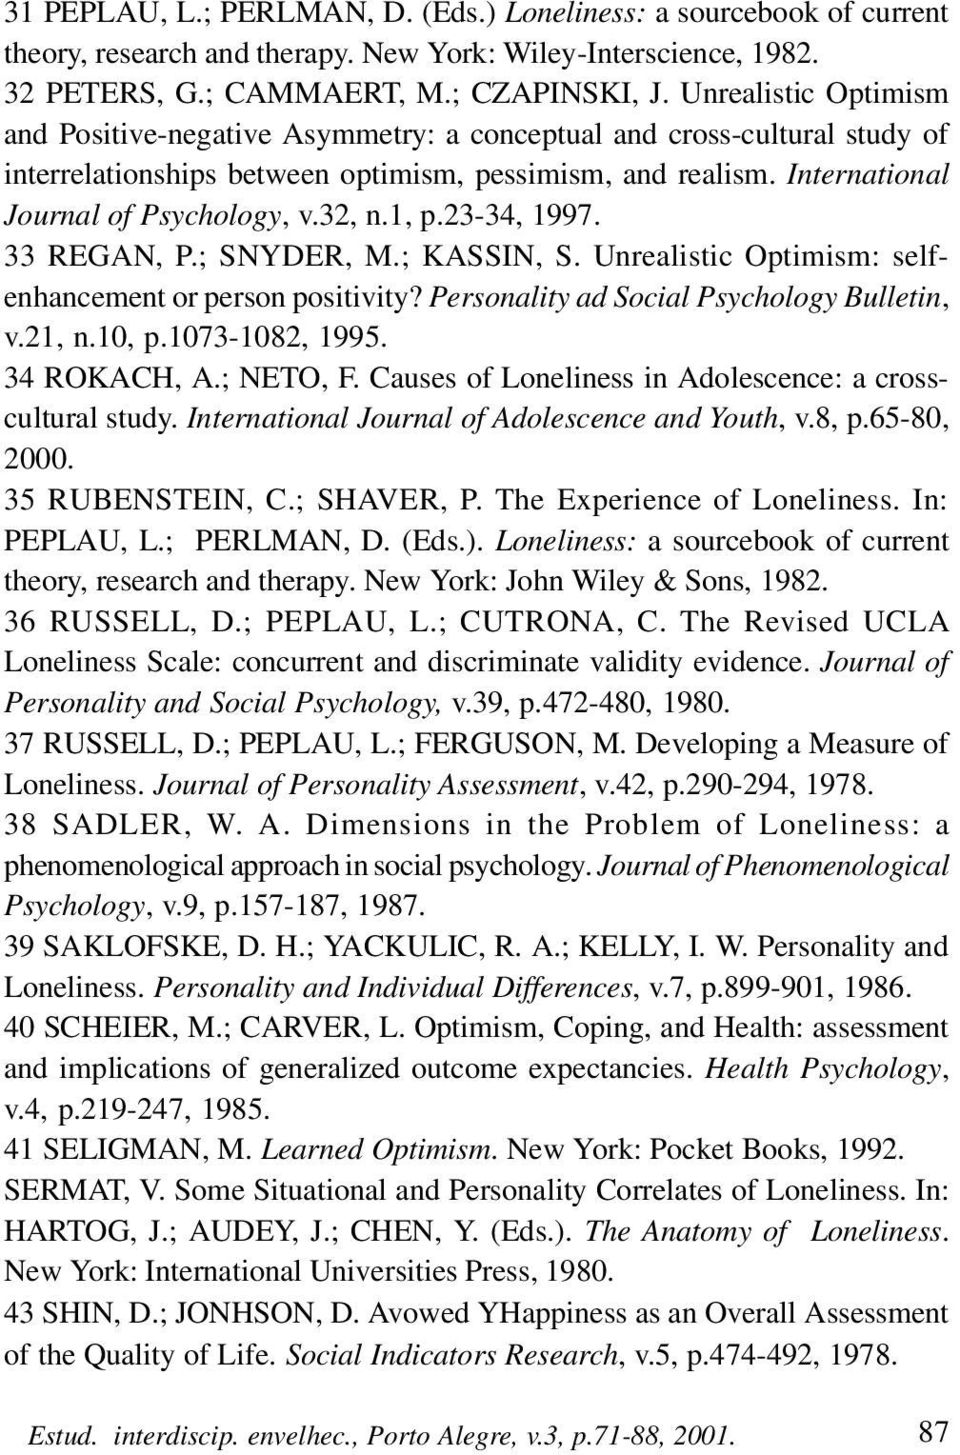 32, n.1, p.23-34, 1997. 33 REGAN, P.; SNYDER, M.; KASSIN, S. Unrealistic Optimism: selfenhancement or person positivity? Personality ad Social Psychology Bulletin, v.21, n.10, p.1073-1082, 1995.